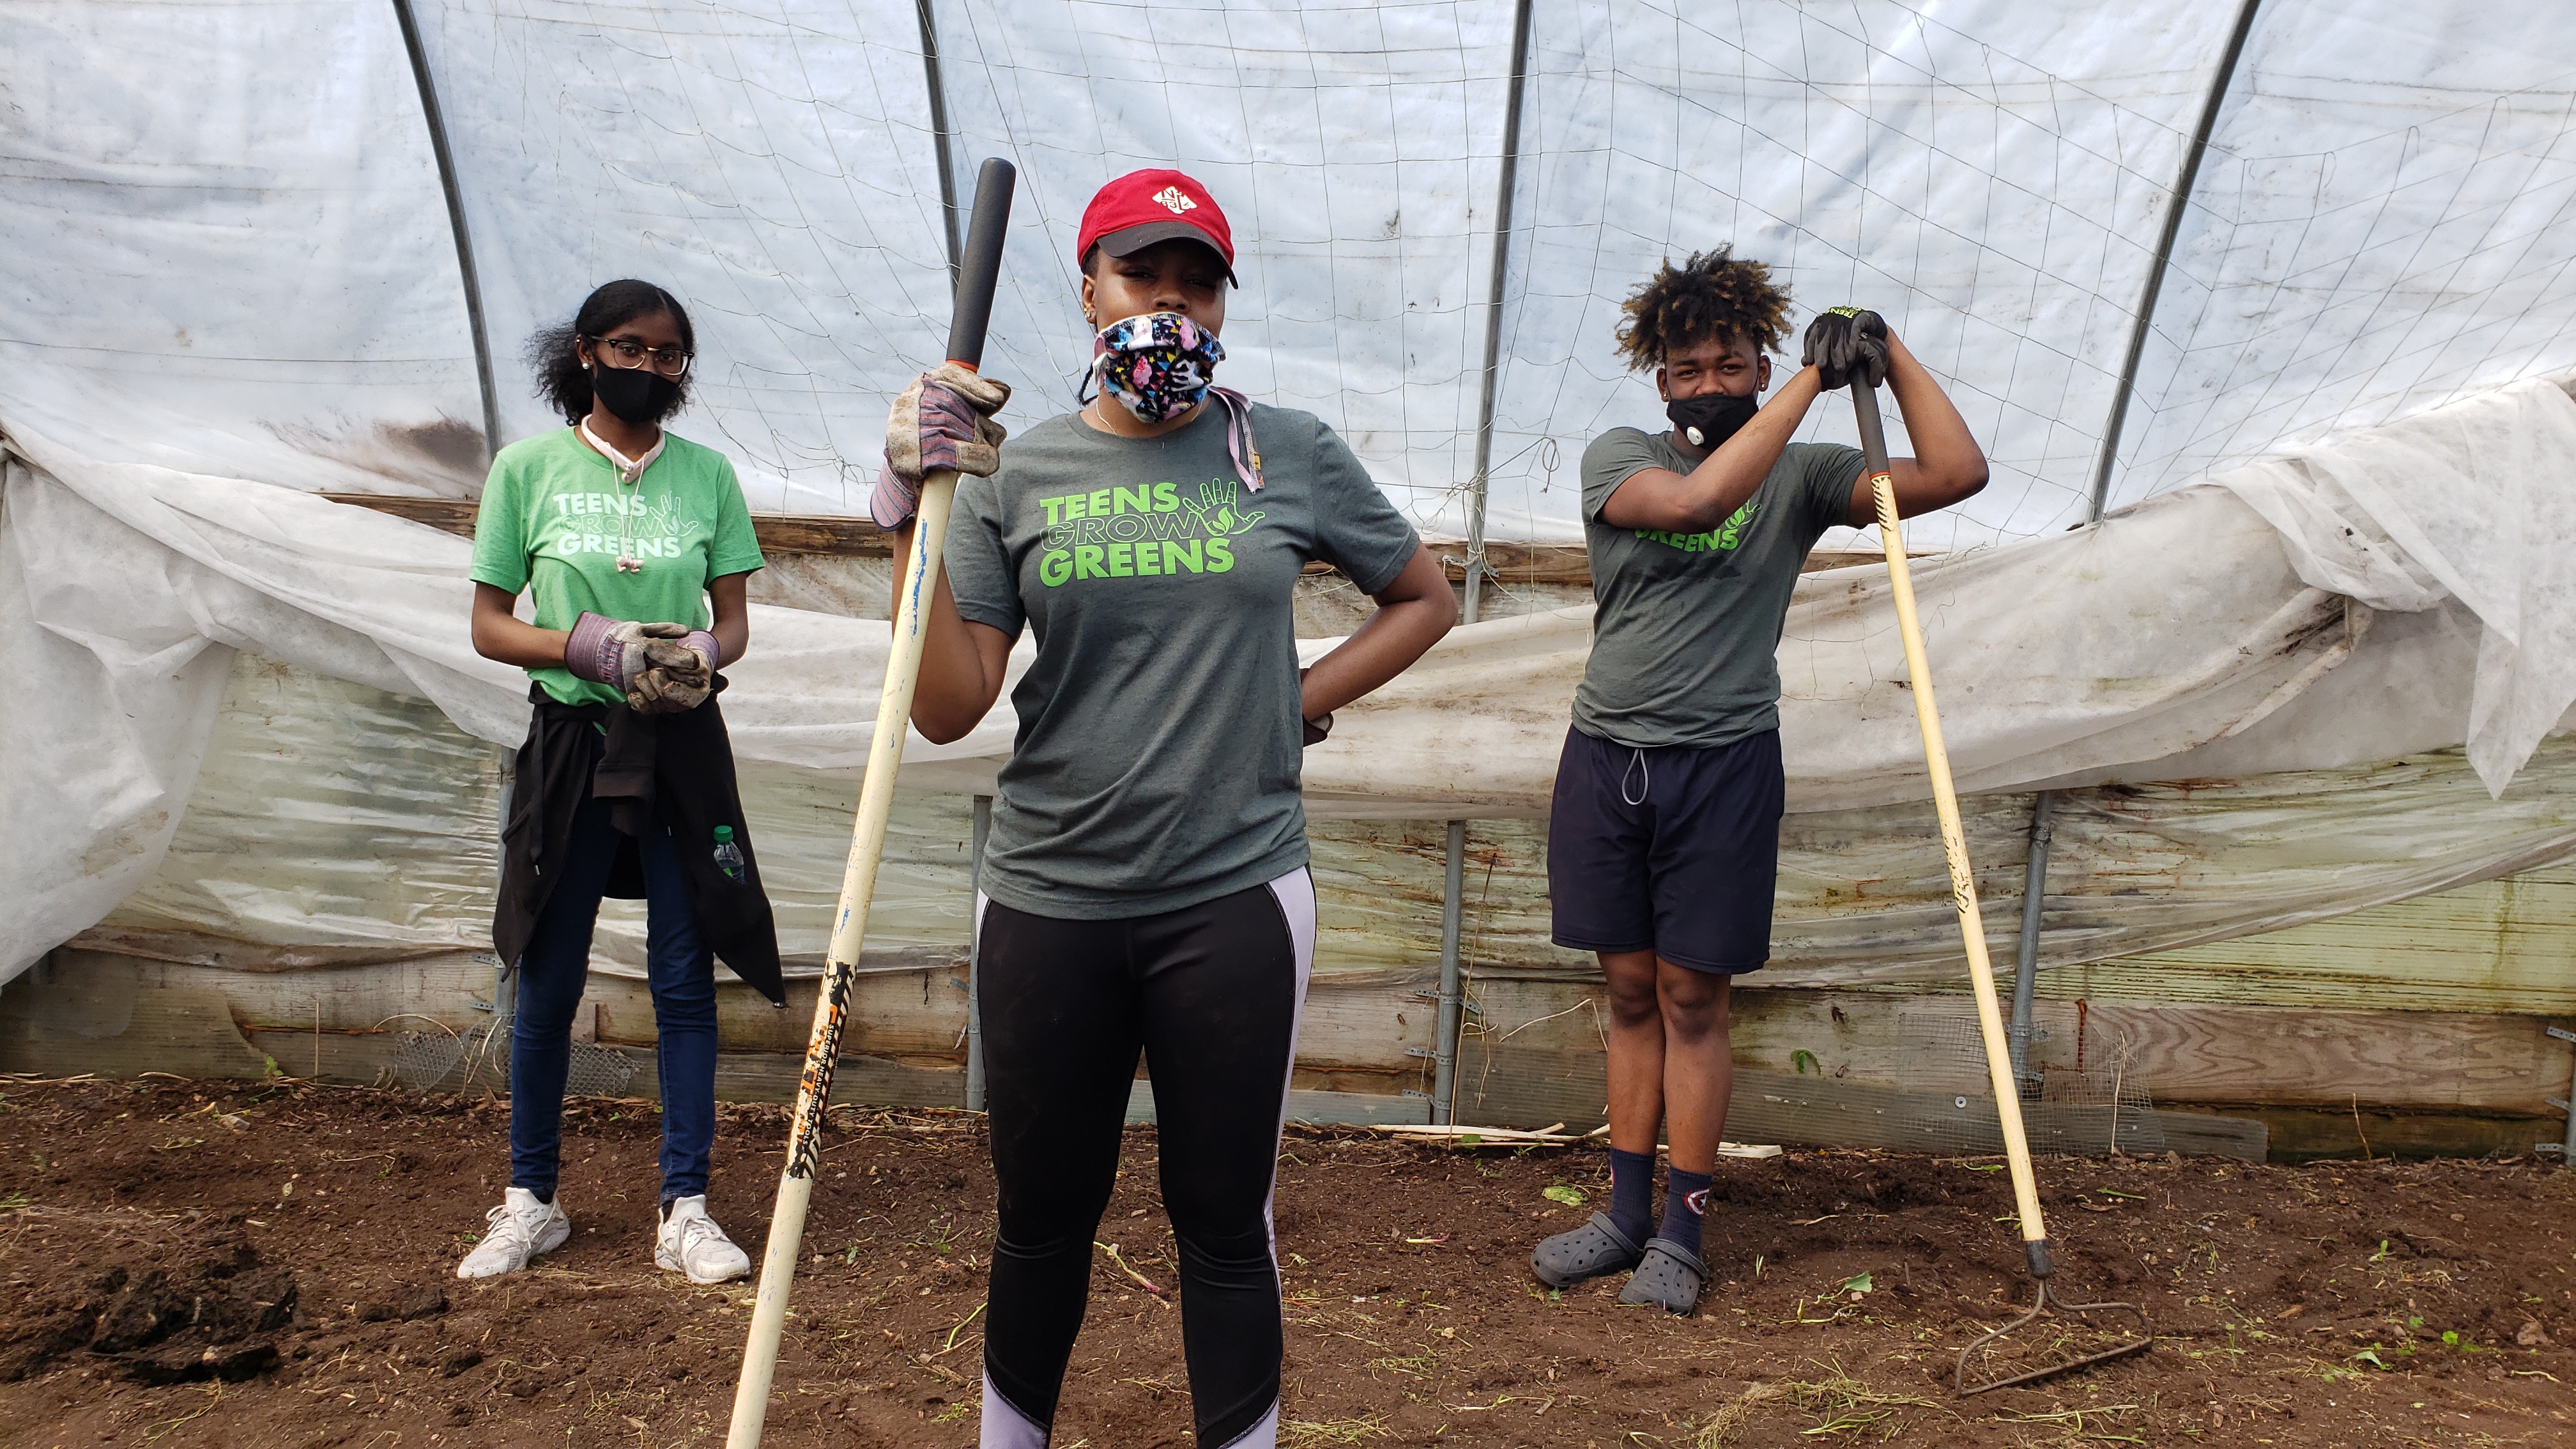 Increasing Food Accessibility & Empowering Youth: Community Changemaker Teens Grow Greens